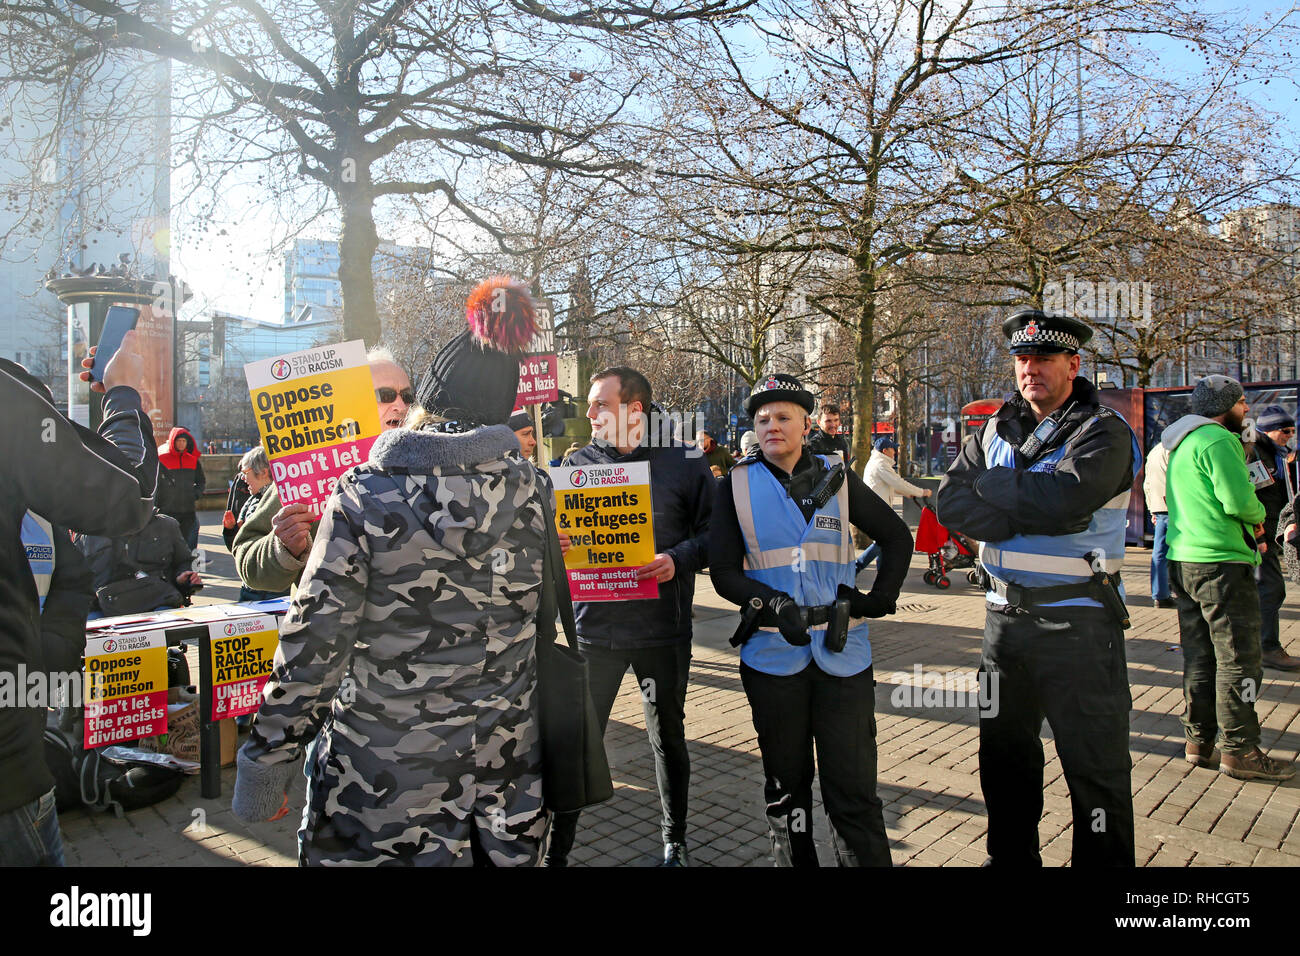 Manchester, UK. 2nd February 2019. Stand up to racism campaigners face hostility from right wing protesters.  The anti racists called for solidarity at the 'reclaim out city event' but faced abuse from members of the right wing 'yellow vest' UK movement with police having to prevent a breach of the peace, Piccadilly Gardens,  Manchester, UK, 2nd February 2019 (C)Barbara Cook/Alamy Live News Credit: Barbara Cook/Alamy Live News Stock Photo